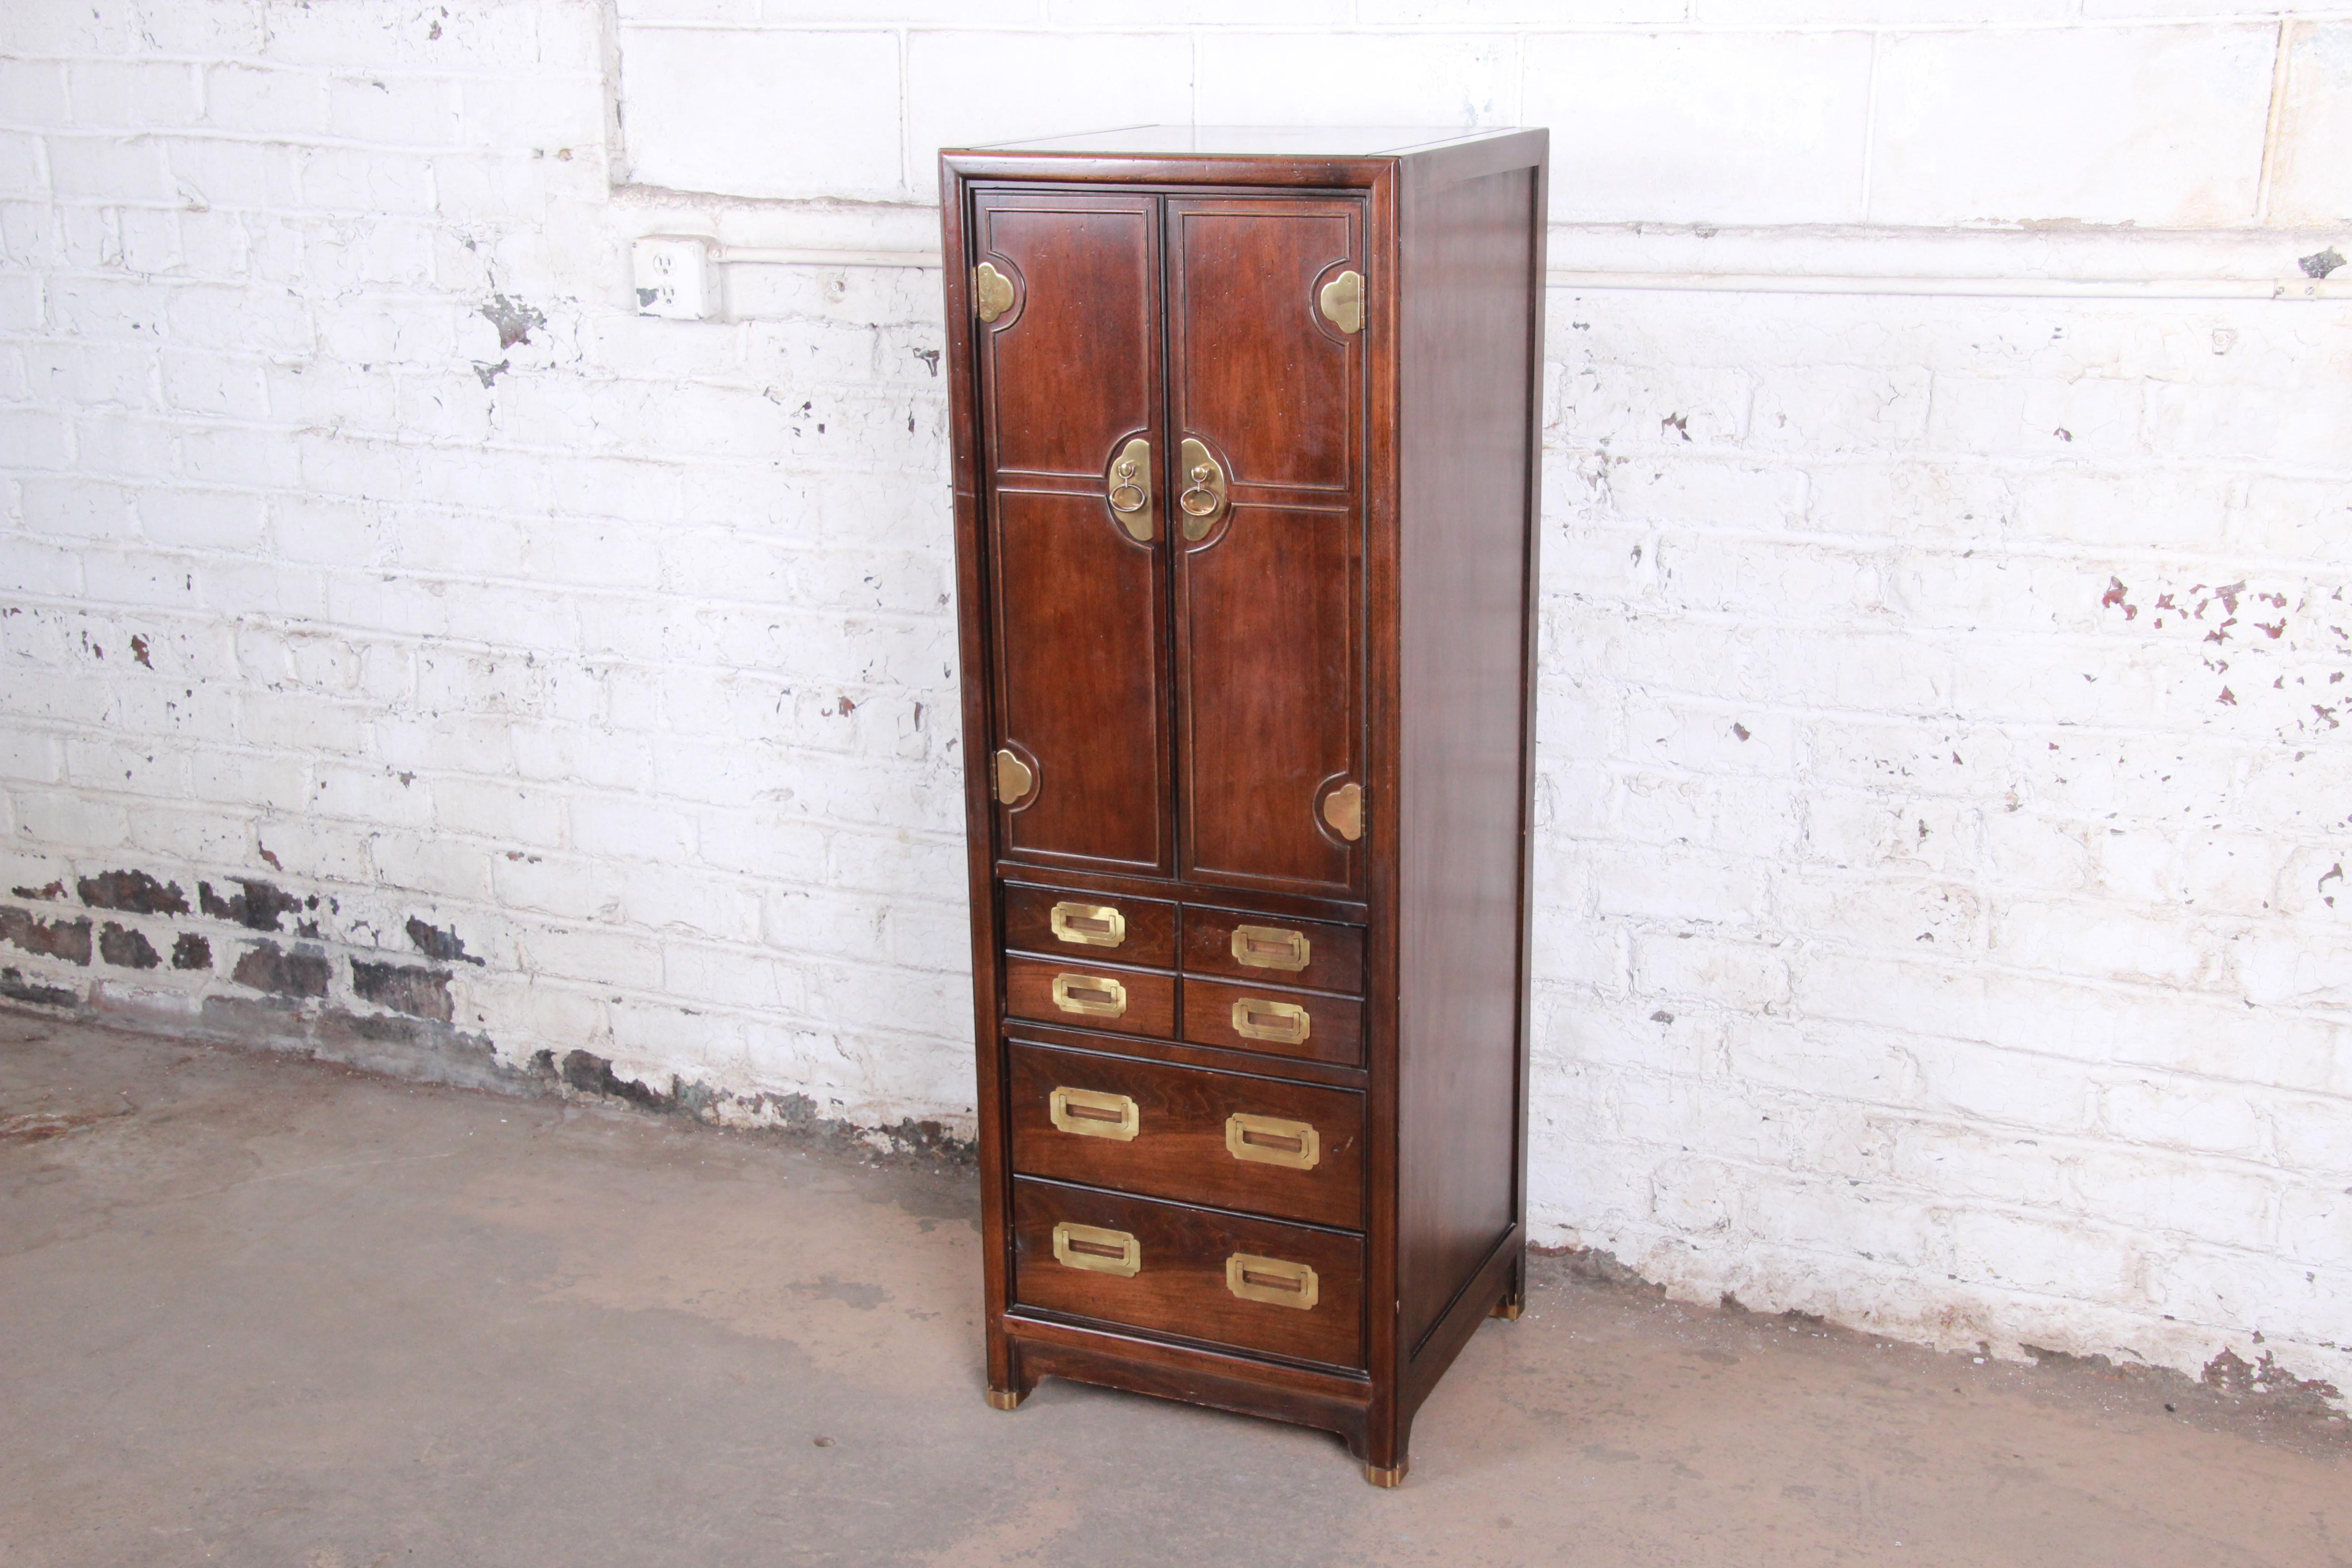 A beautiful midcentury Hollywood Regency Campaign style lingerie chest by Hickory. The chest features gorgeous dark teak wood grain and original brass hardware. It offers good storage, with a single dovetailed drawer and shelf behind two doors and